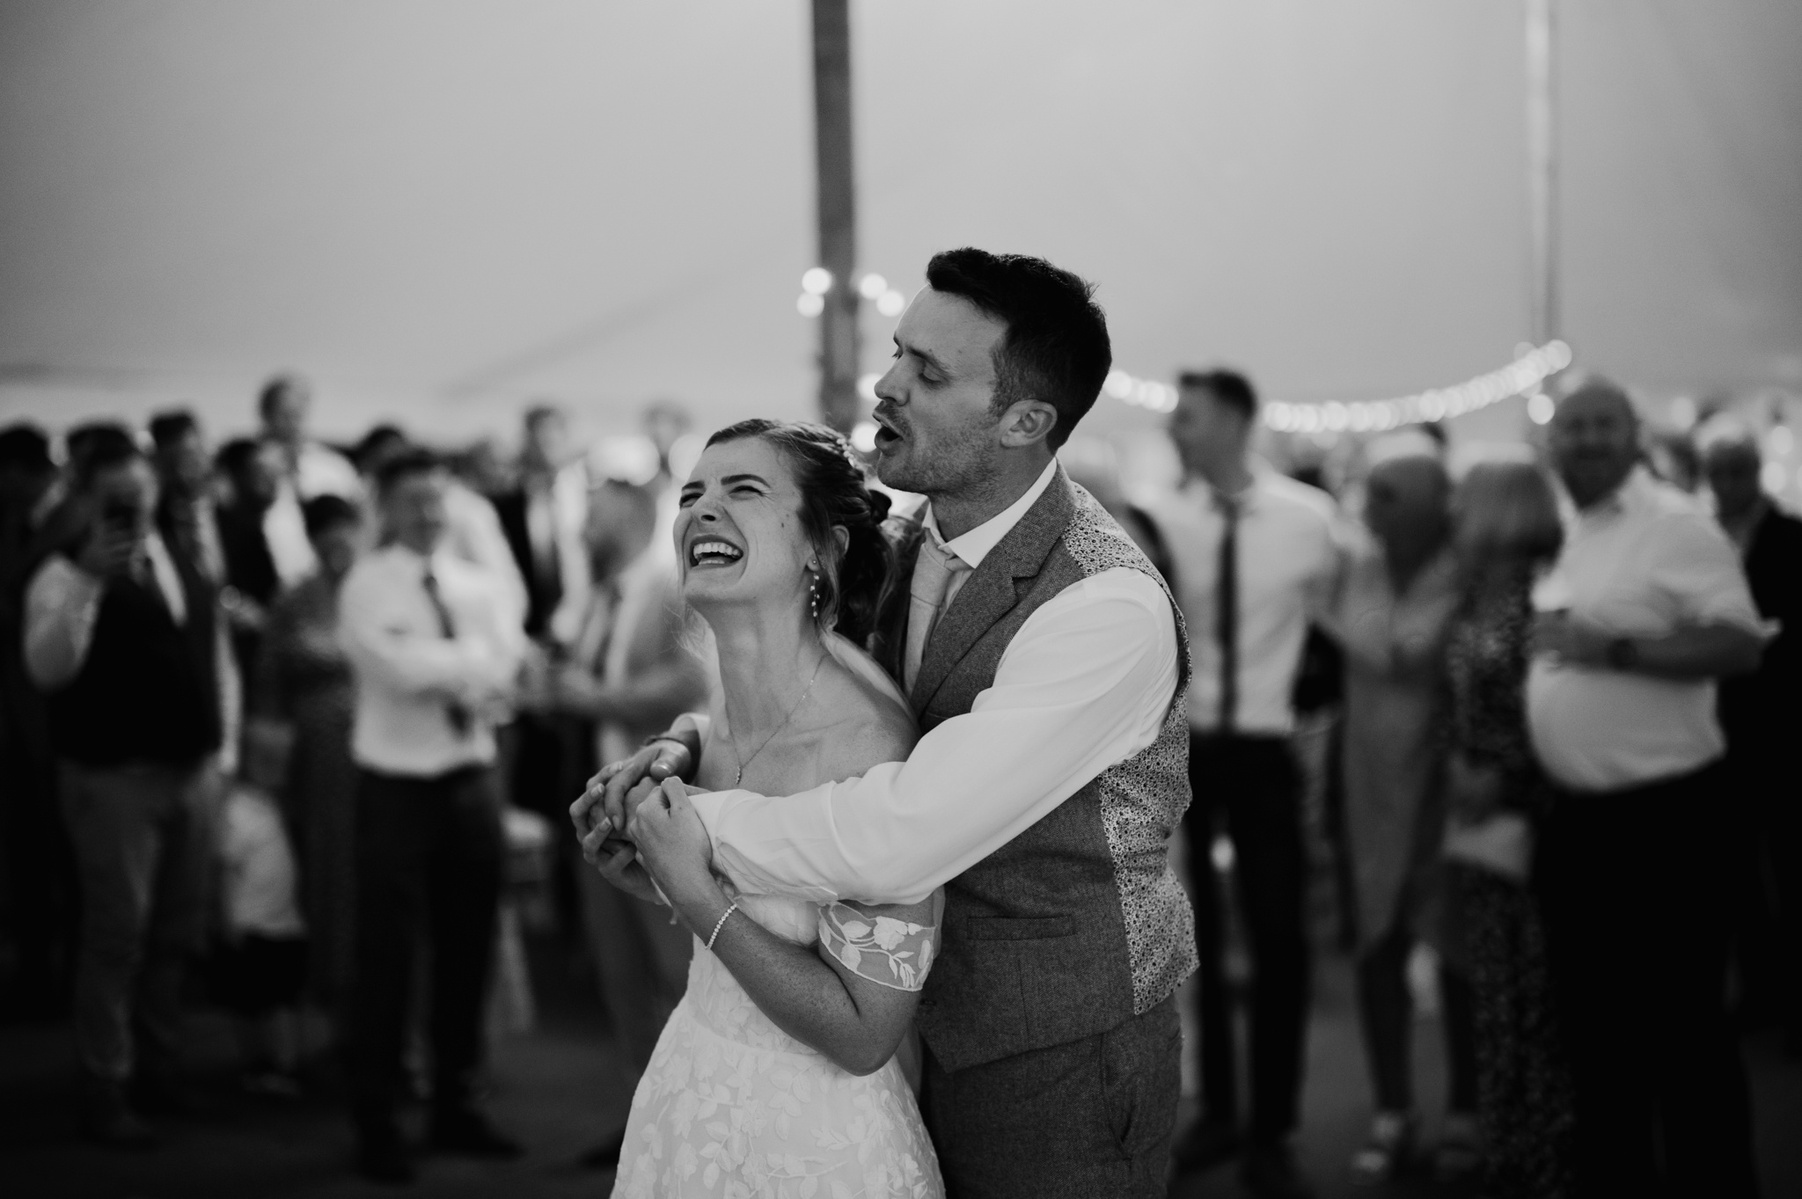 a black and white photo of a kent bride and groom standing in the middle of a teepee dance floor in total love and enjoyment during their reception